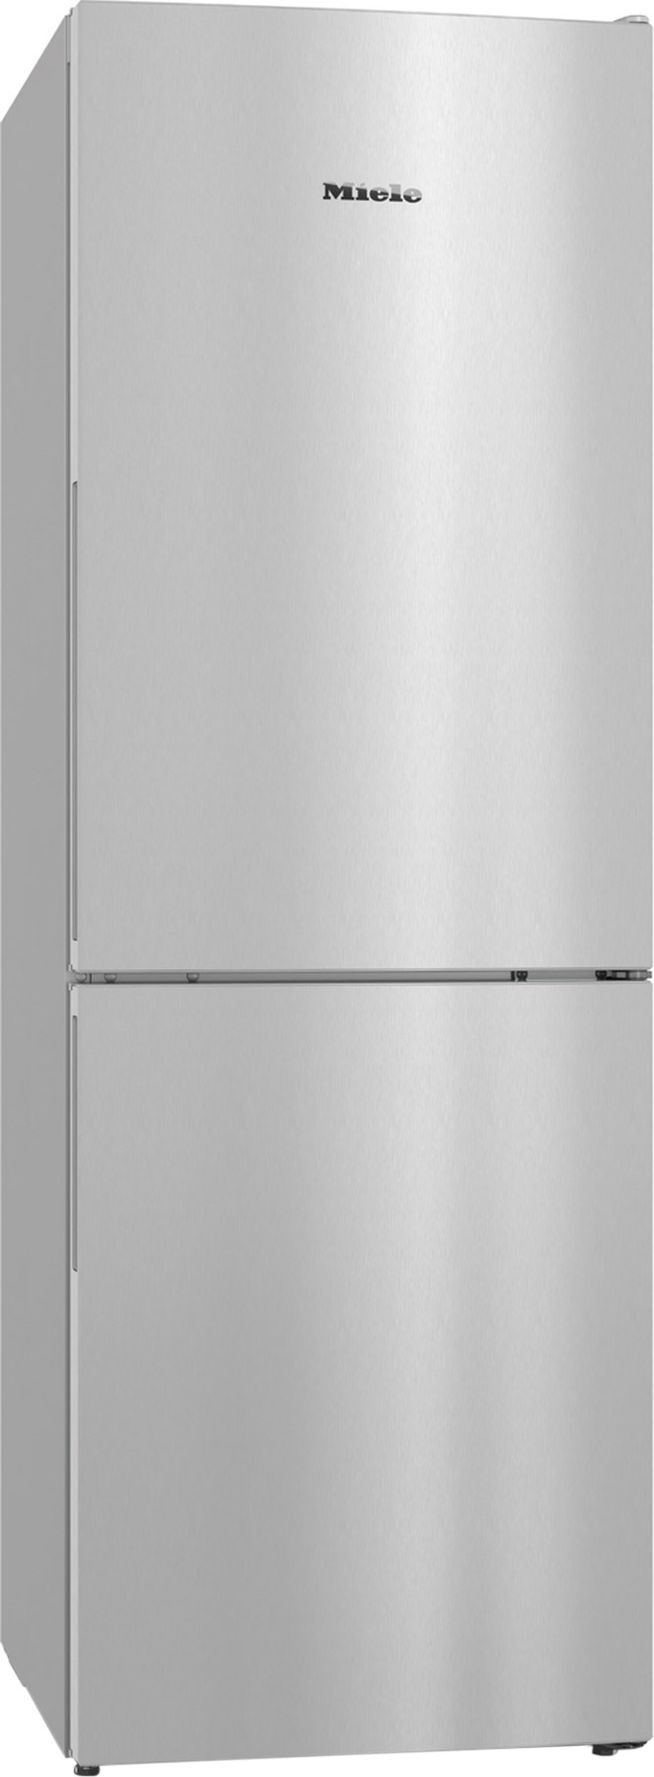 Miele ACTIVE KD4050E 60/40 Fridge Freezer - Clean Steel - E Rated, Stainless Steel